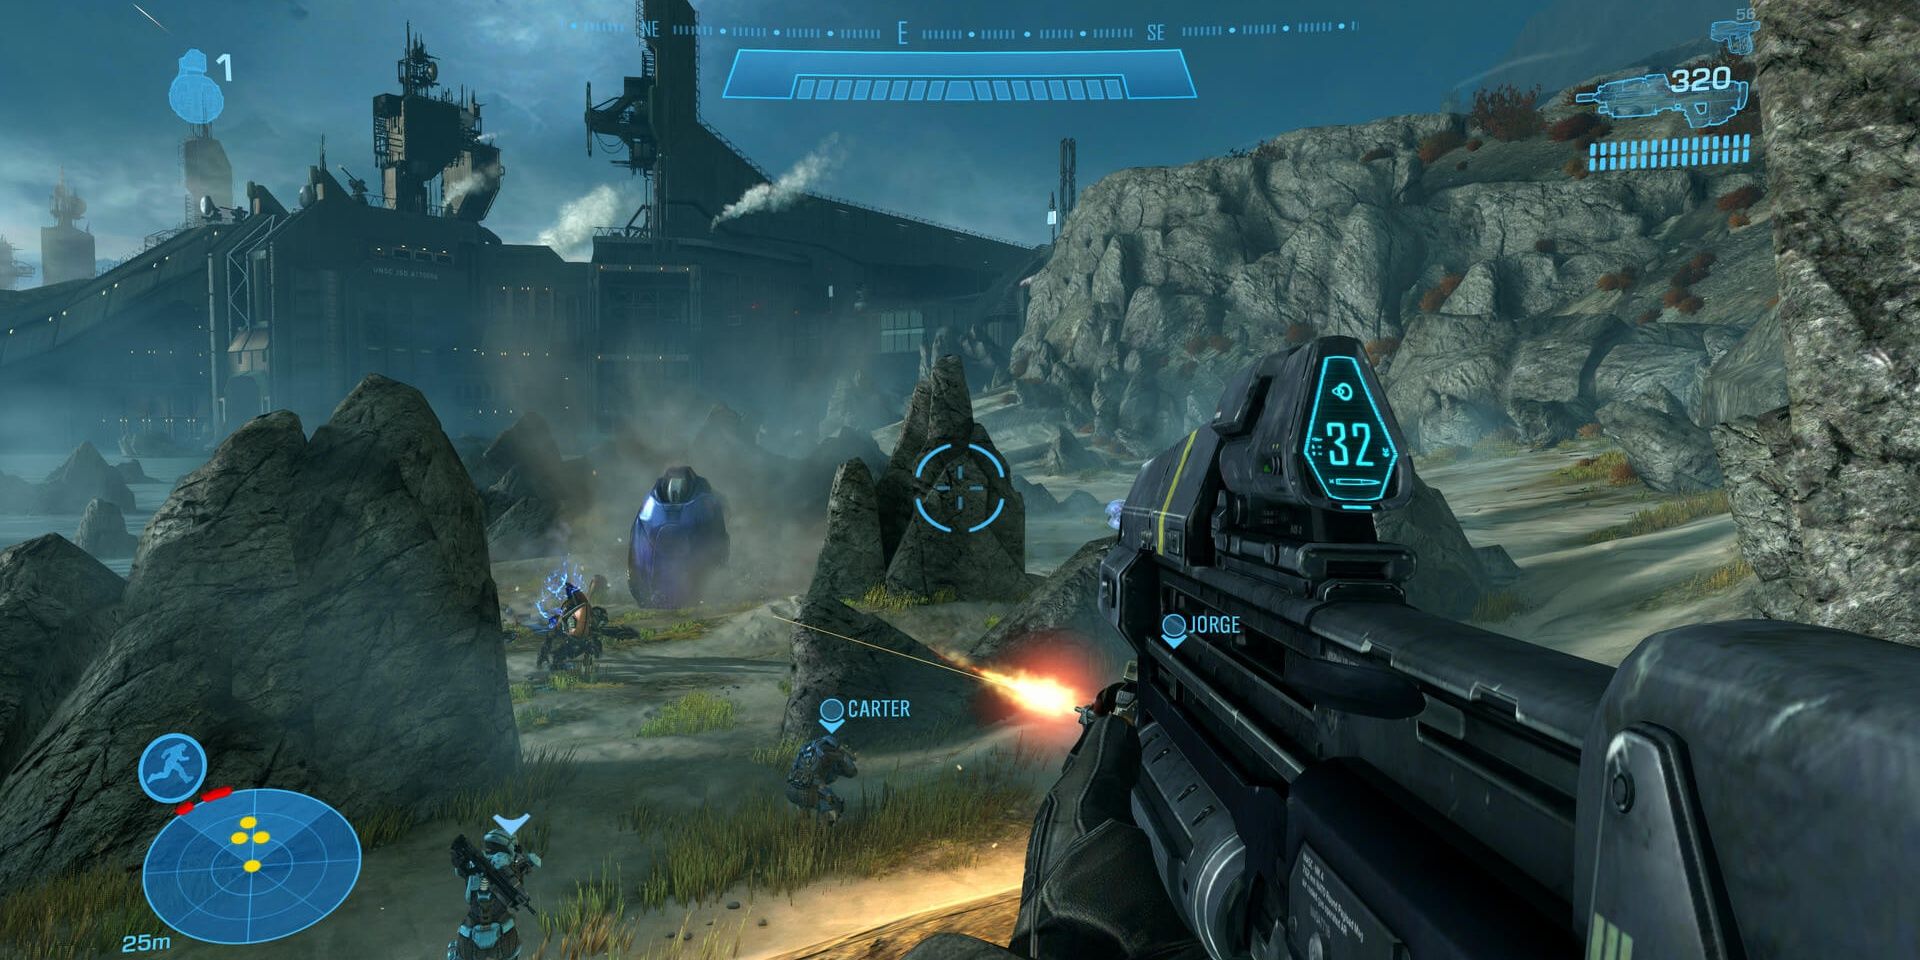 The multiplayer in Halo The Master Chief Collection